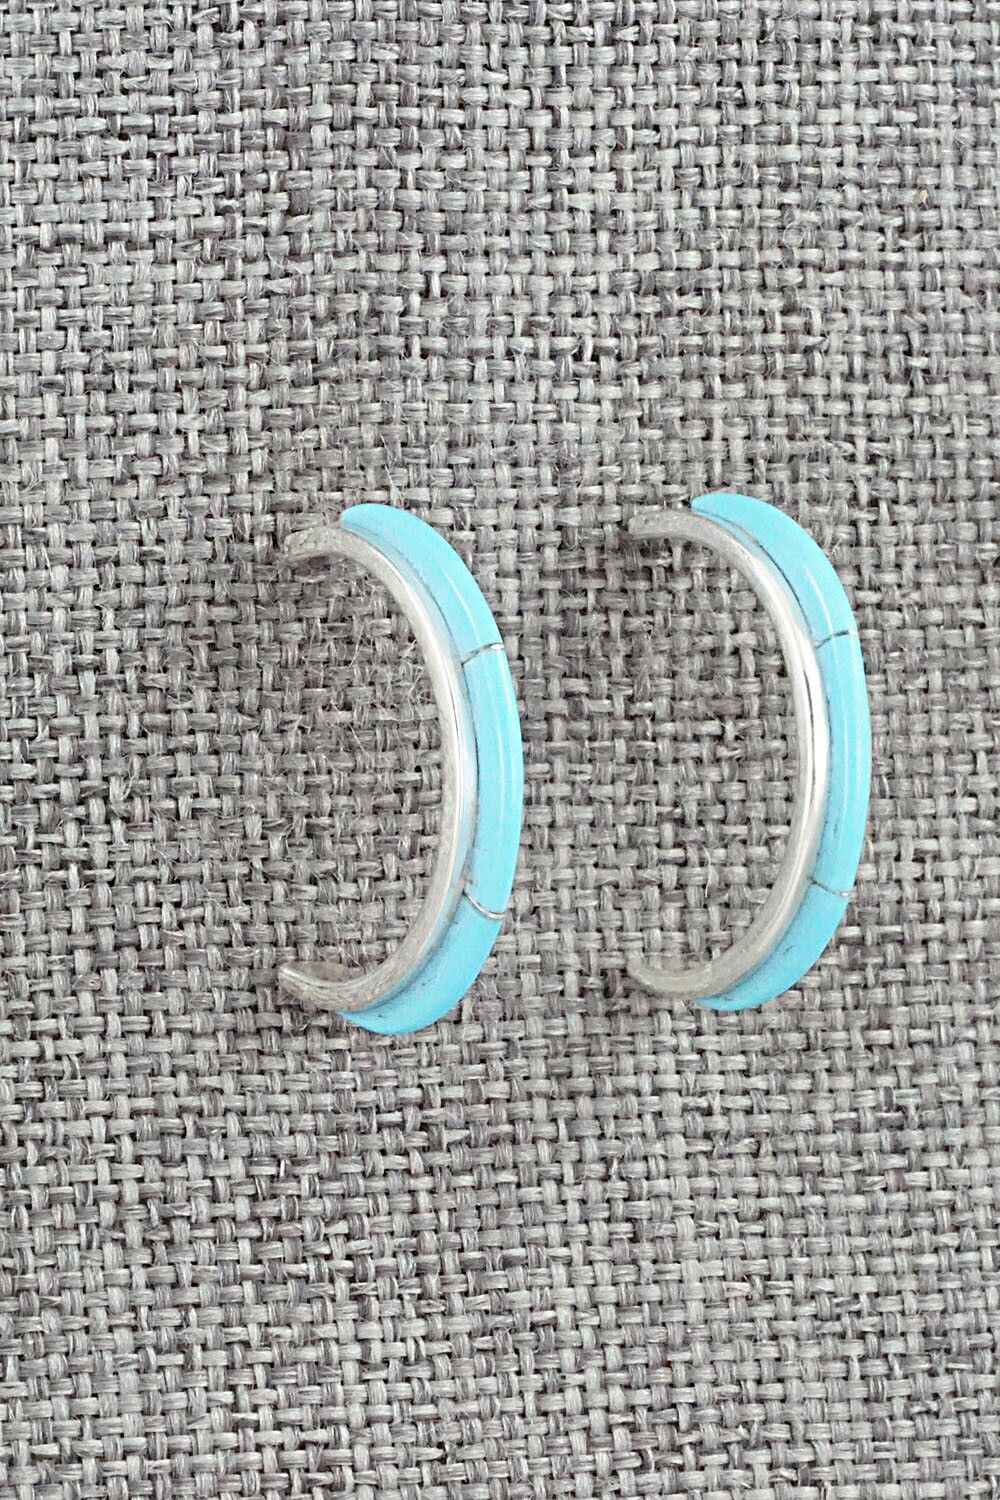 Turquoise & Sterling Silver Earrings - Bevis Massie